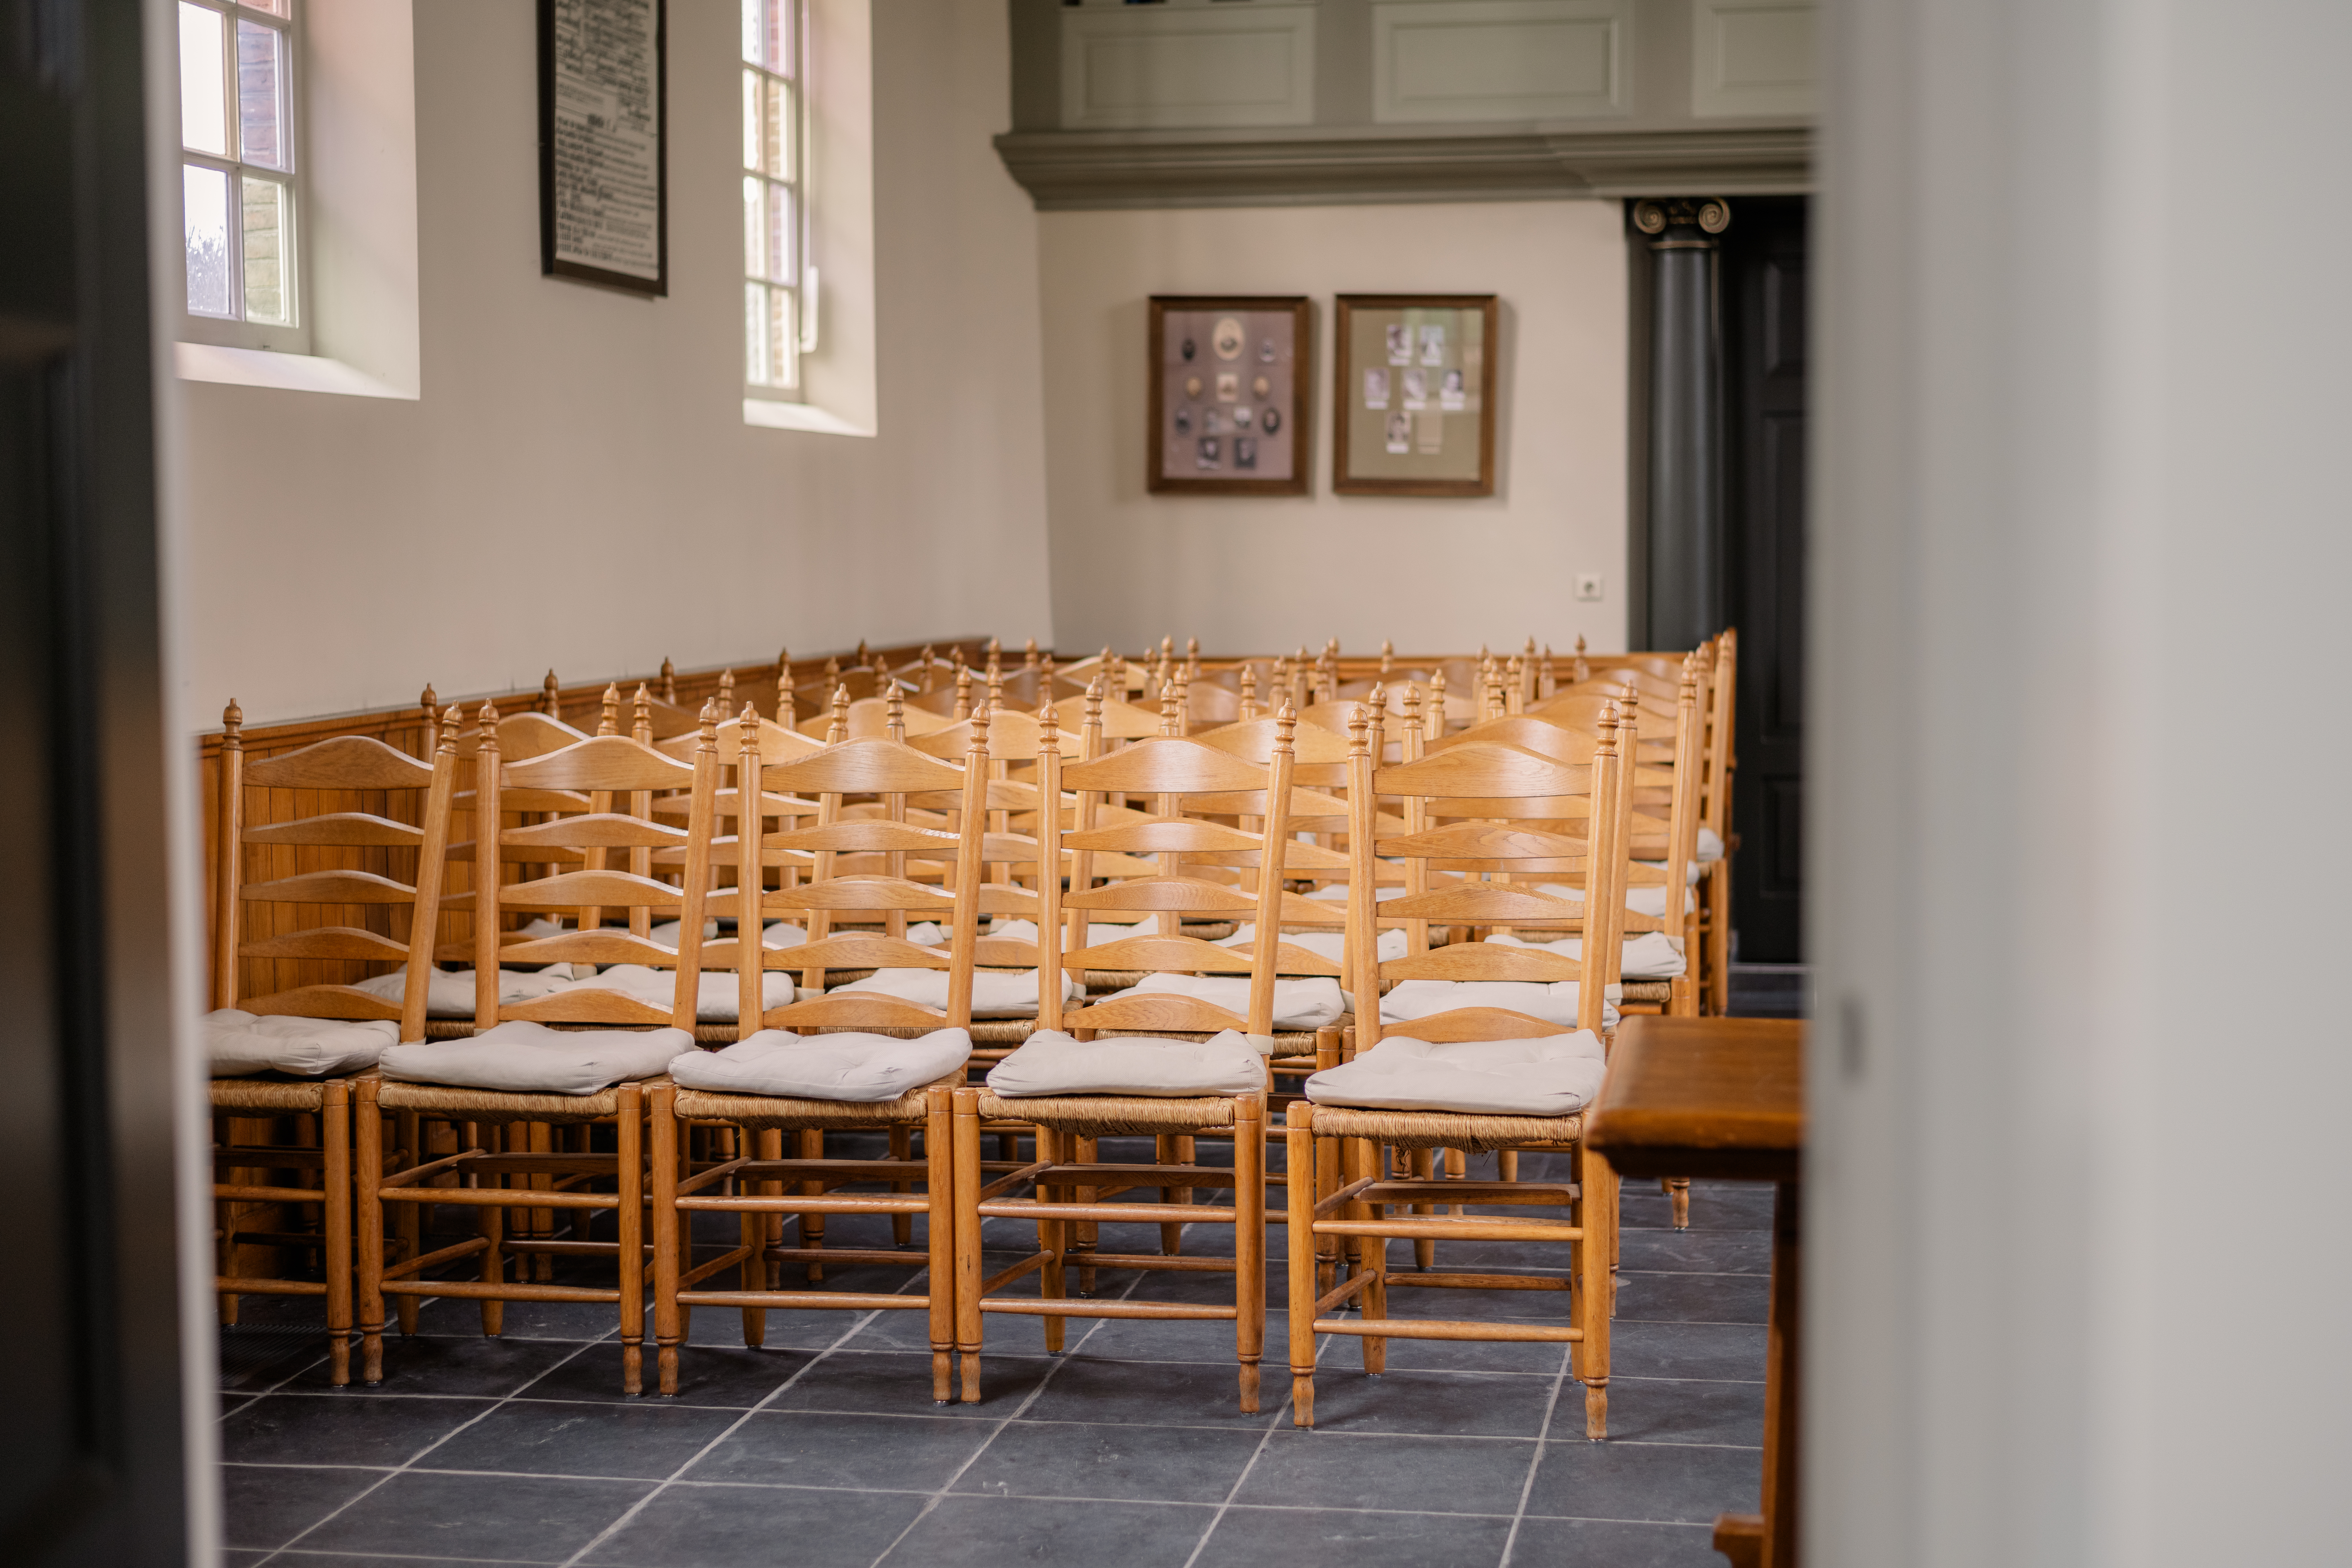 View from the kitchen into the Church Hall full of wooden chairs and pews